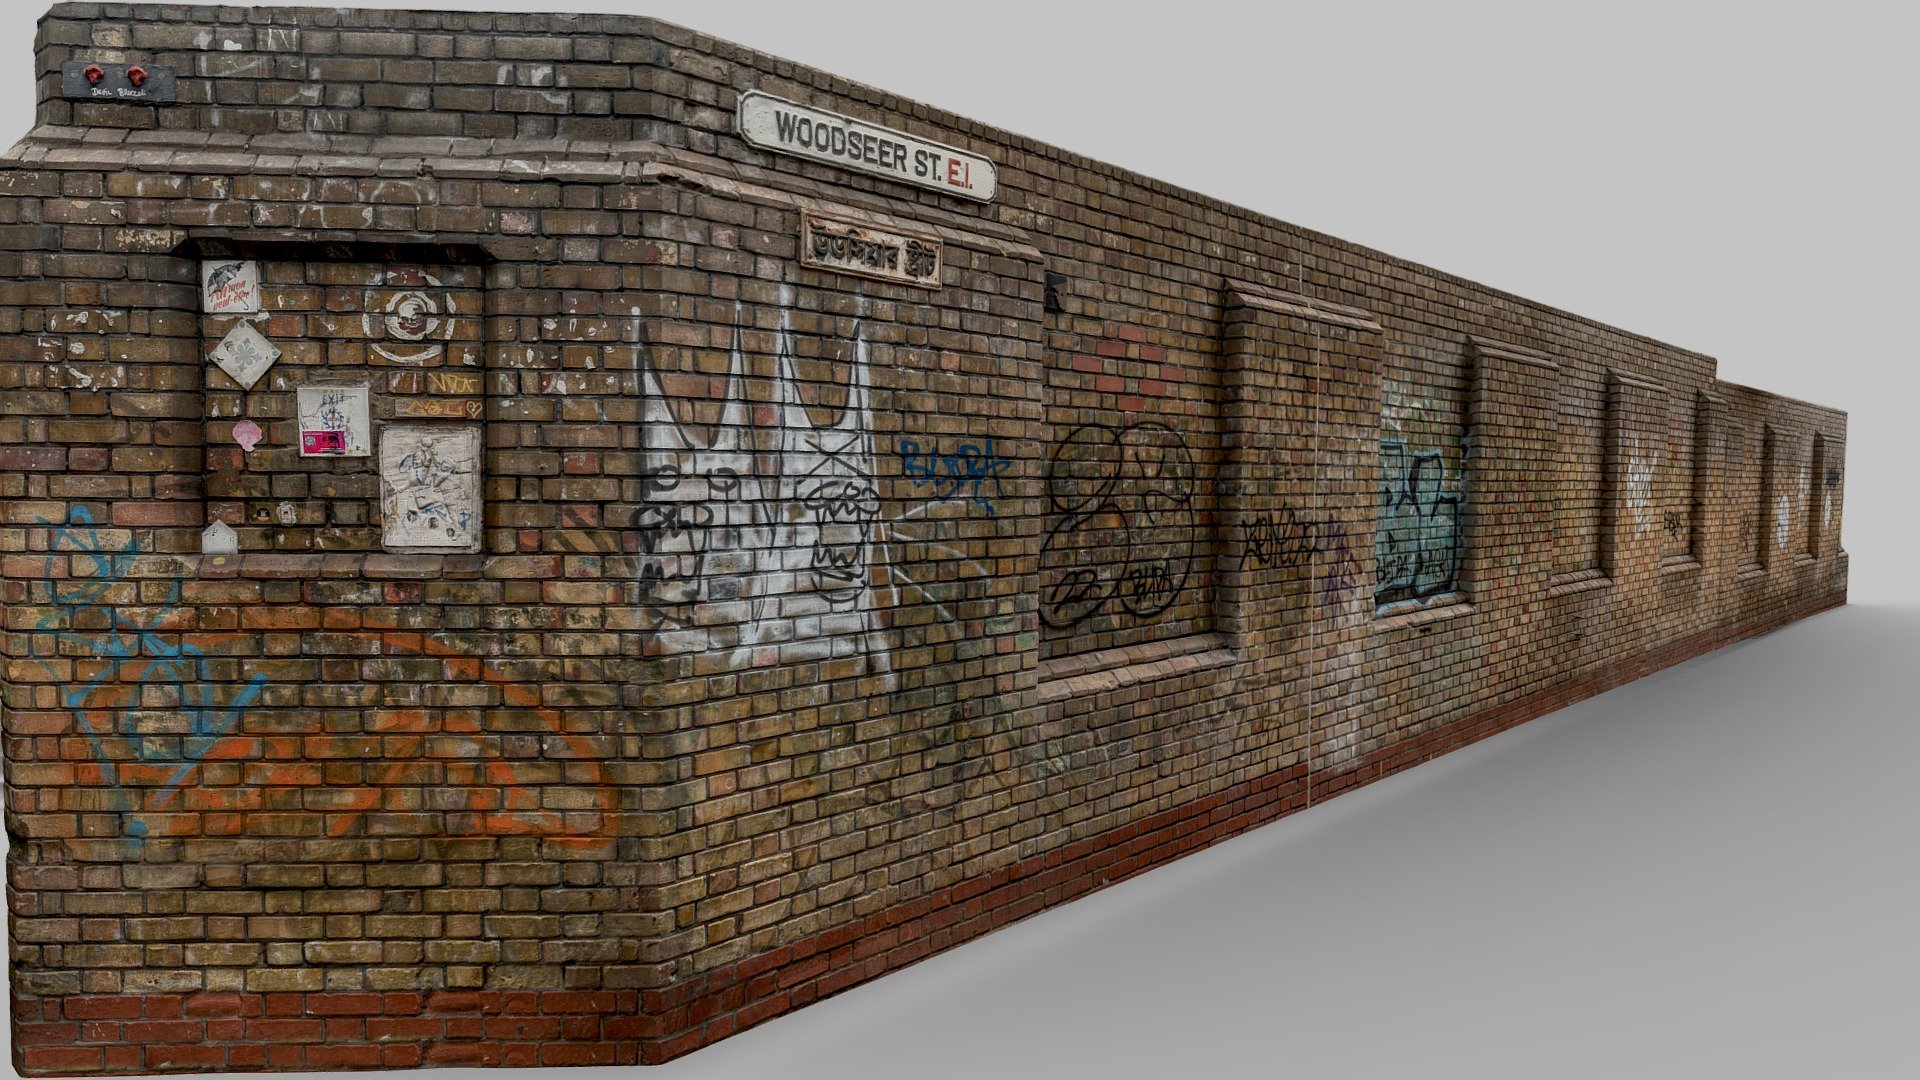 London, Brick Lane. High poly model ideal for photorealistic renders : https://youtu.be/IkBwi537en8

16k original textures, 8k rendering in sketchfab





Wall scan No. 3

Urban &amp; Industrial collections

Good for adding realism to your industrial / abandoned scenes

diffuse/normal/specular - Wall scan No. 3 - London, The Truman Brewery - Buy Royalty Free 3D model by 3Dystopia (@Dystopia) 3d model